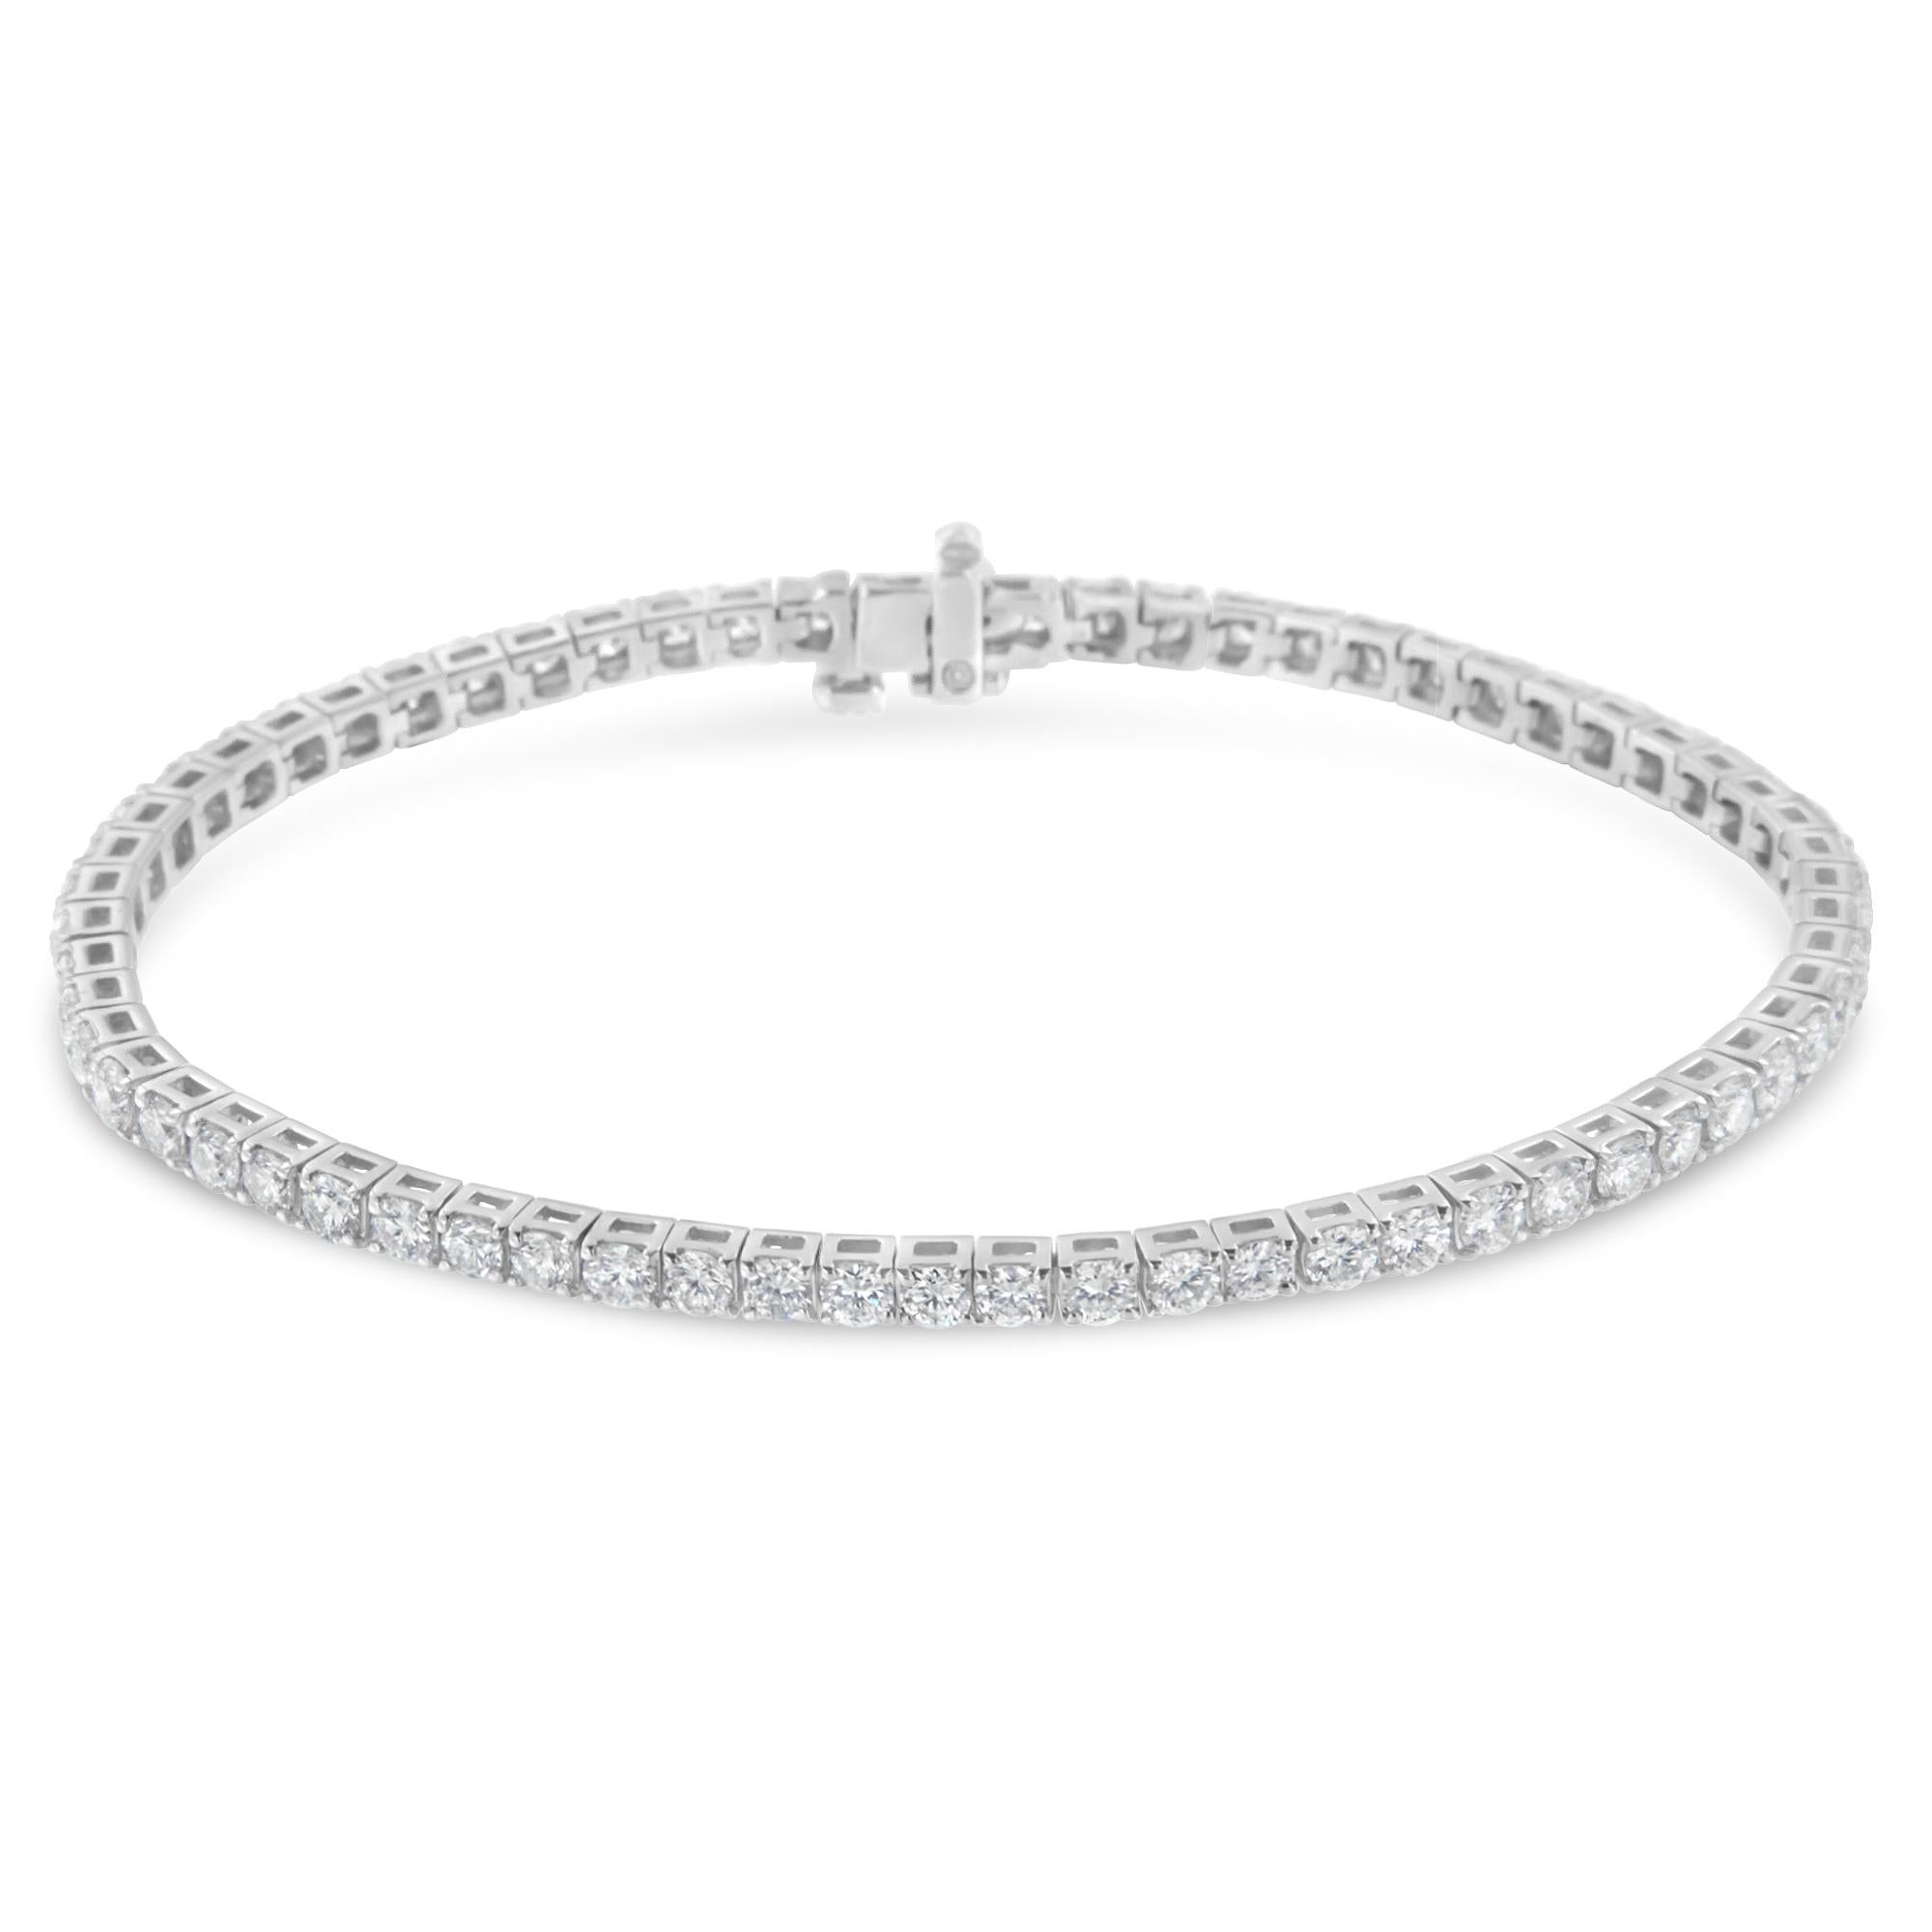 Elevate her attire with the luxe look of this magnificent diamond tennis bracelet. Elegant and timeless, this gorgeous 14K white gold bracelet features 6 carats total weight of round cut diamonds in four prong settings. The 7” bracelet fastens